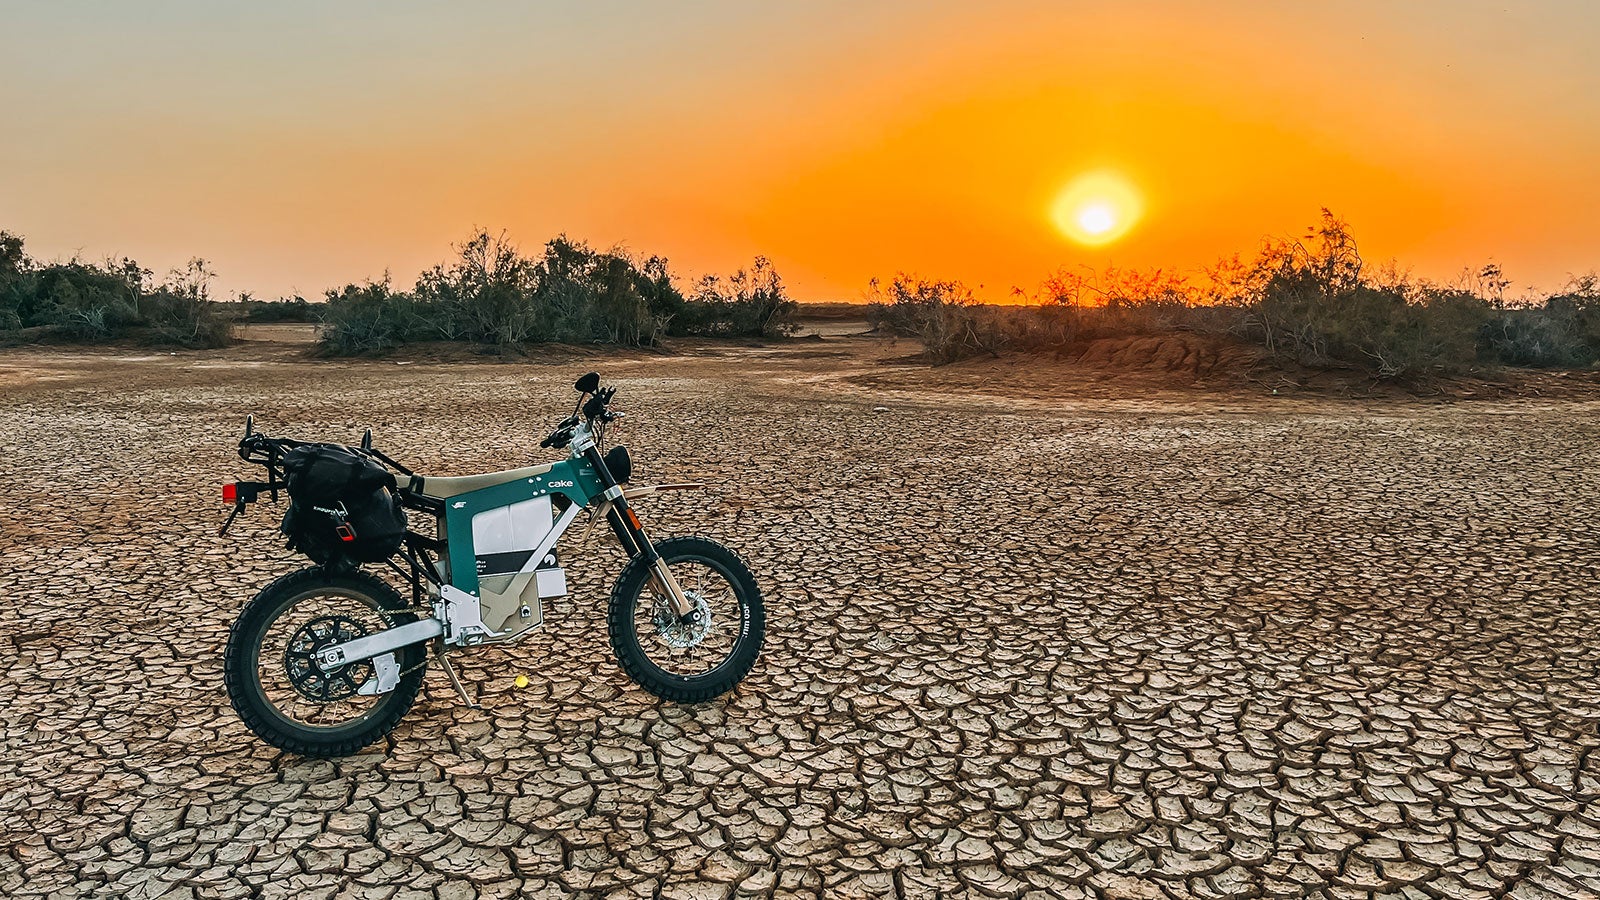 How Sinje Gottwald Crossed Africa on an Electric Motorcycle